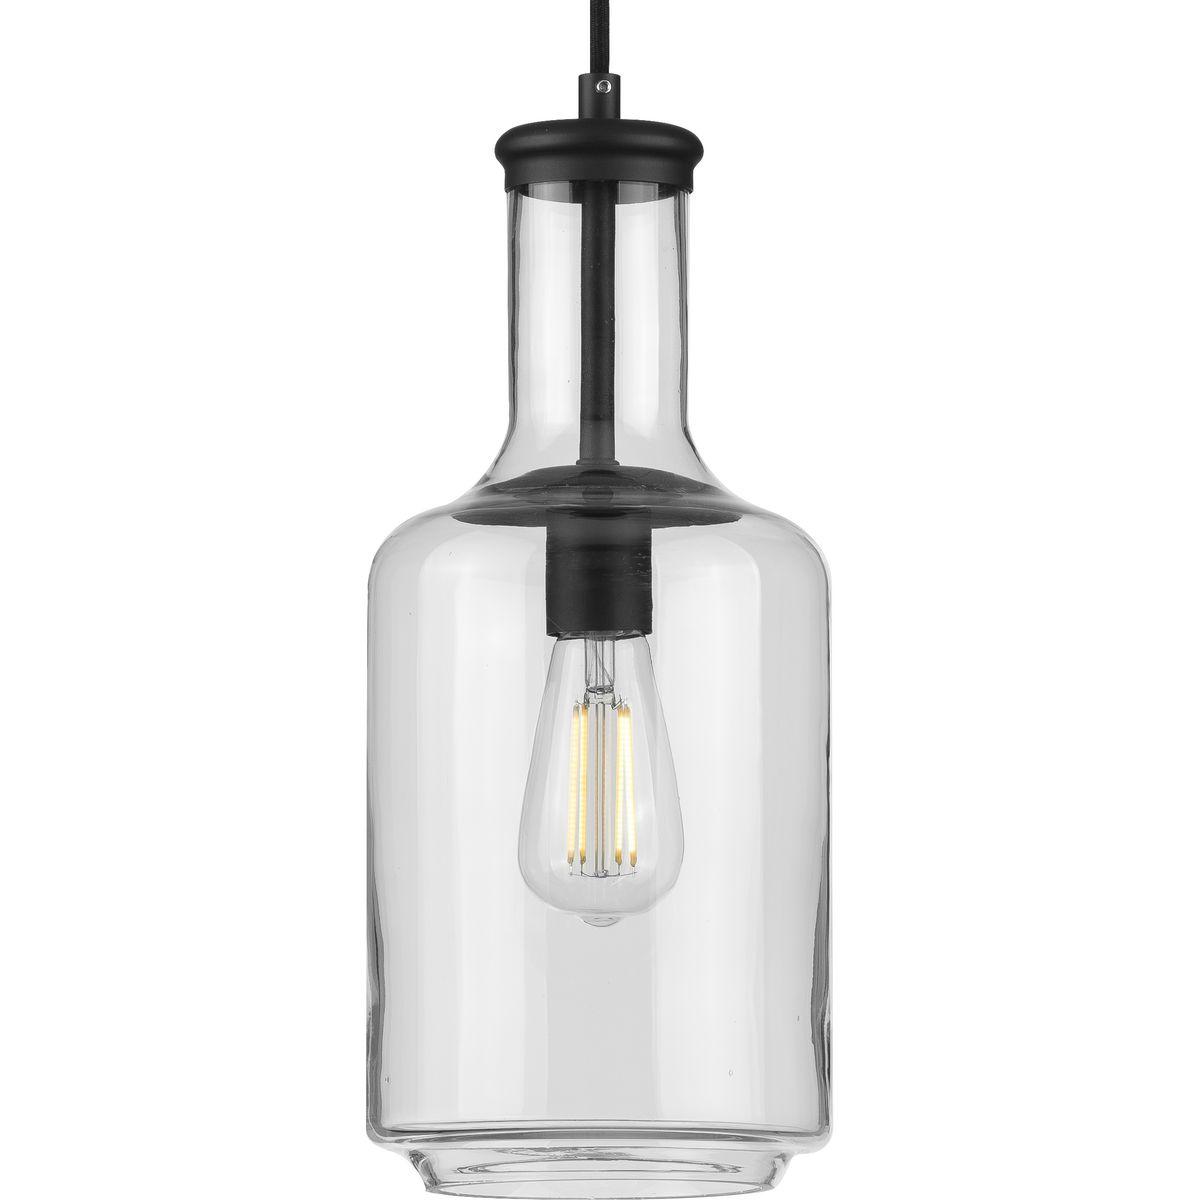 Hubbell P500229-031 Introduce a pop of personality into your home with this pendant. A round ceiling plate coated in a black finish anchors the pendant in place as the light source hangs below. A bottle-inspired clear glass shade adds a twist to a simple industrial style tha